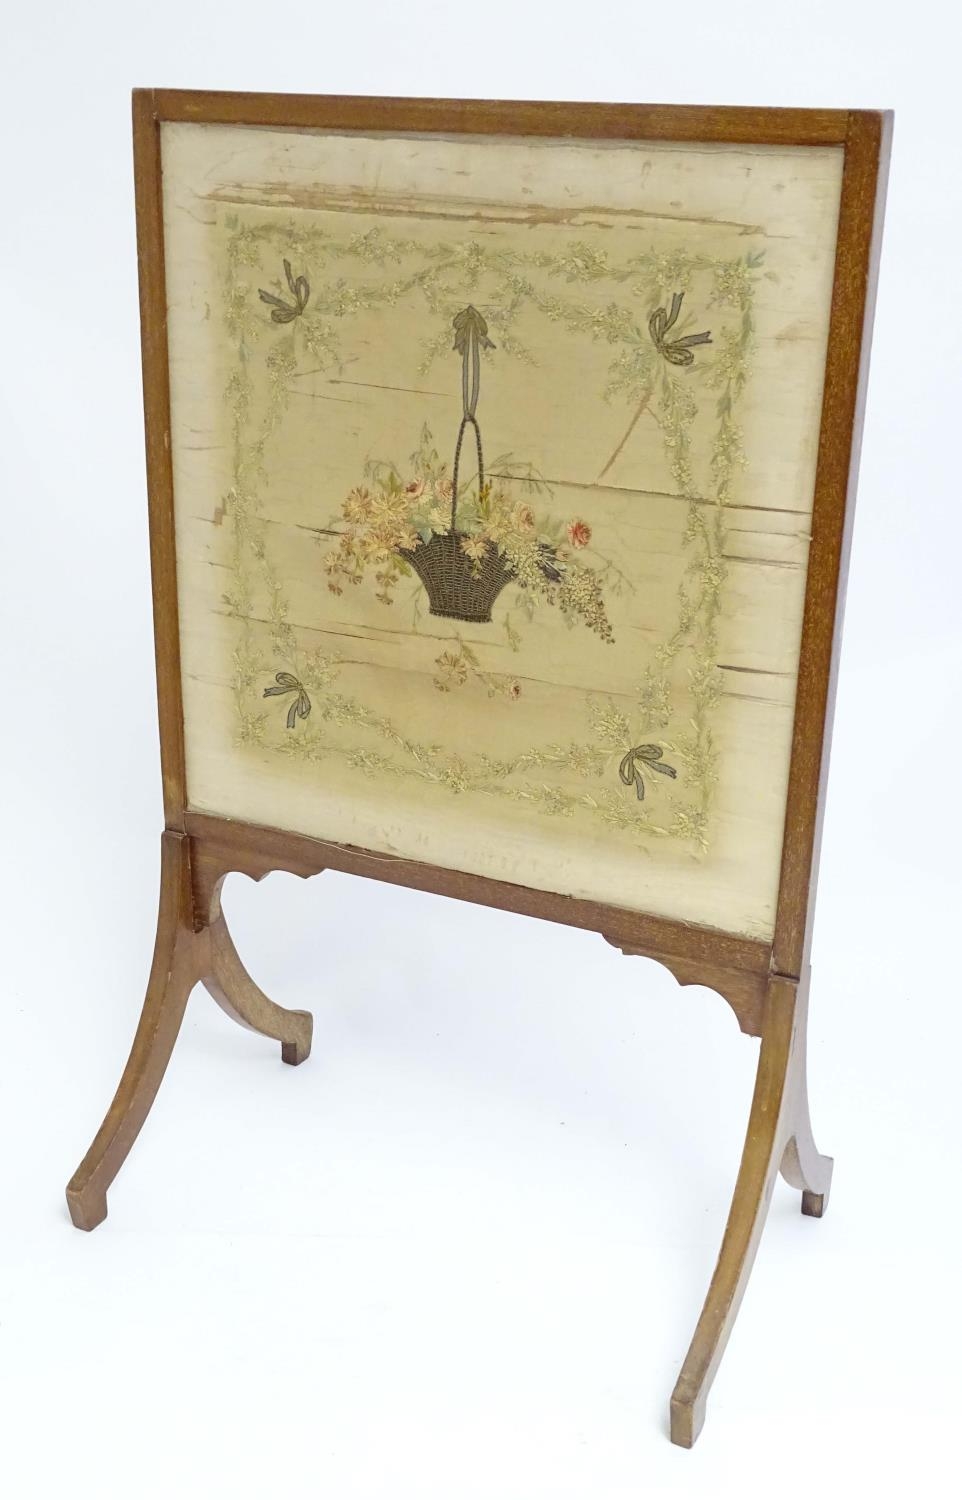 An early 19thC silk needlework with fine floral decoration, bows, swags and a woven basket in a - Image 2 of 10